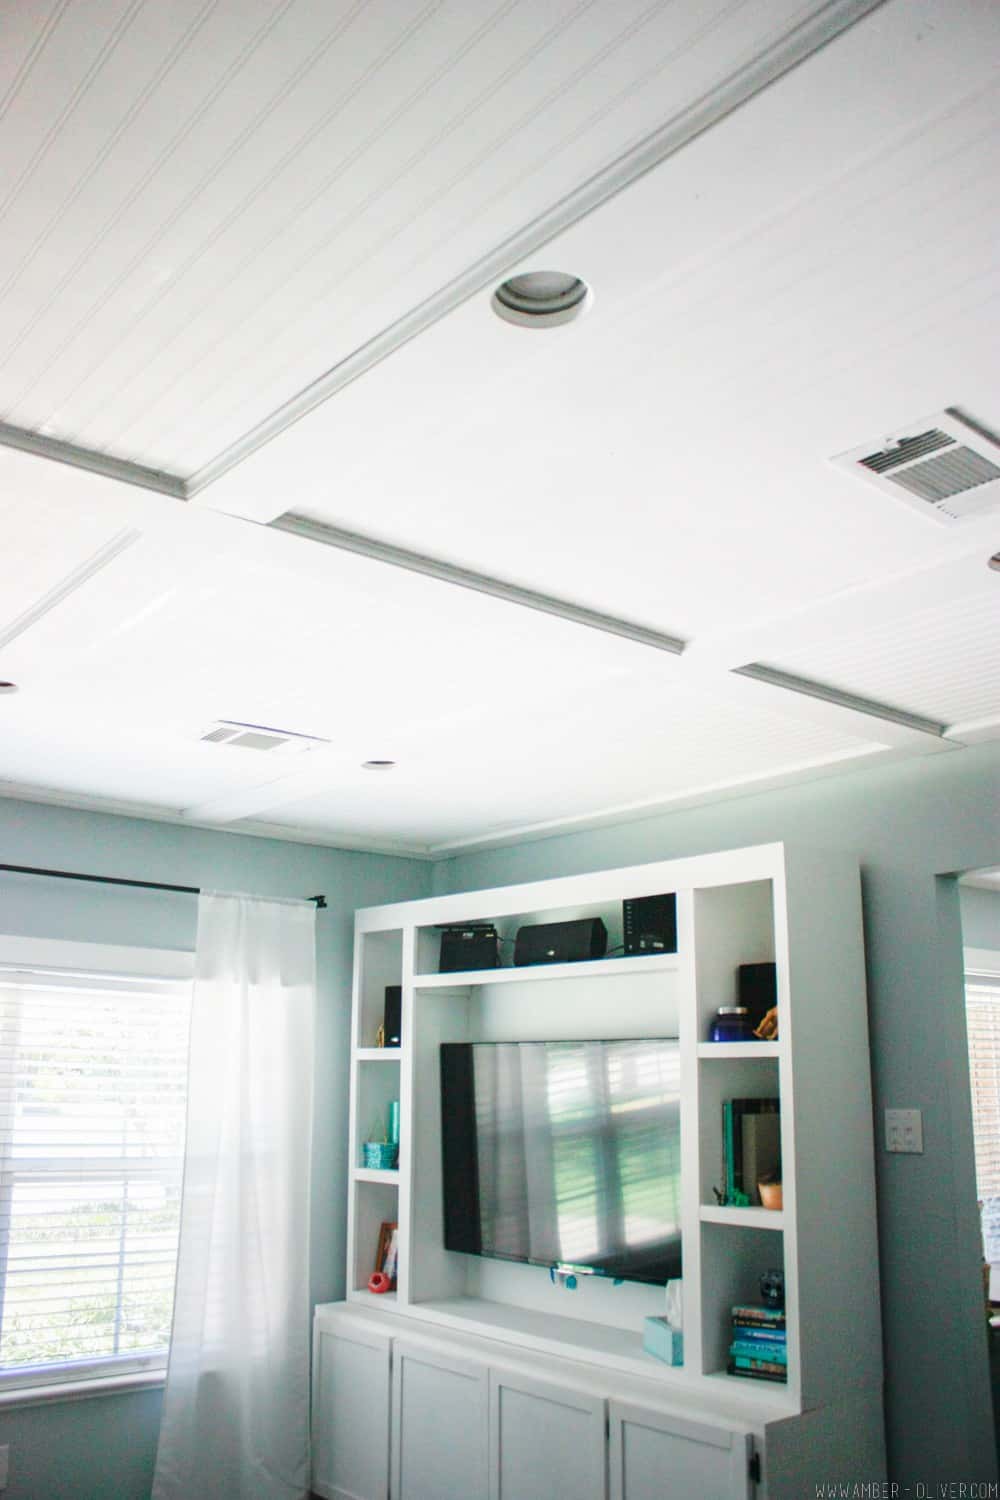 A bead board ceiling adds character and charm to a new home